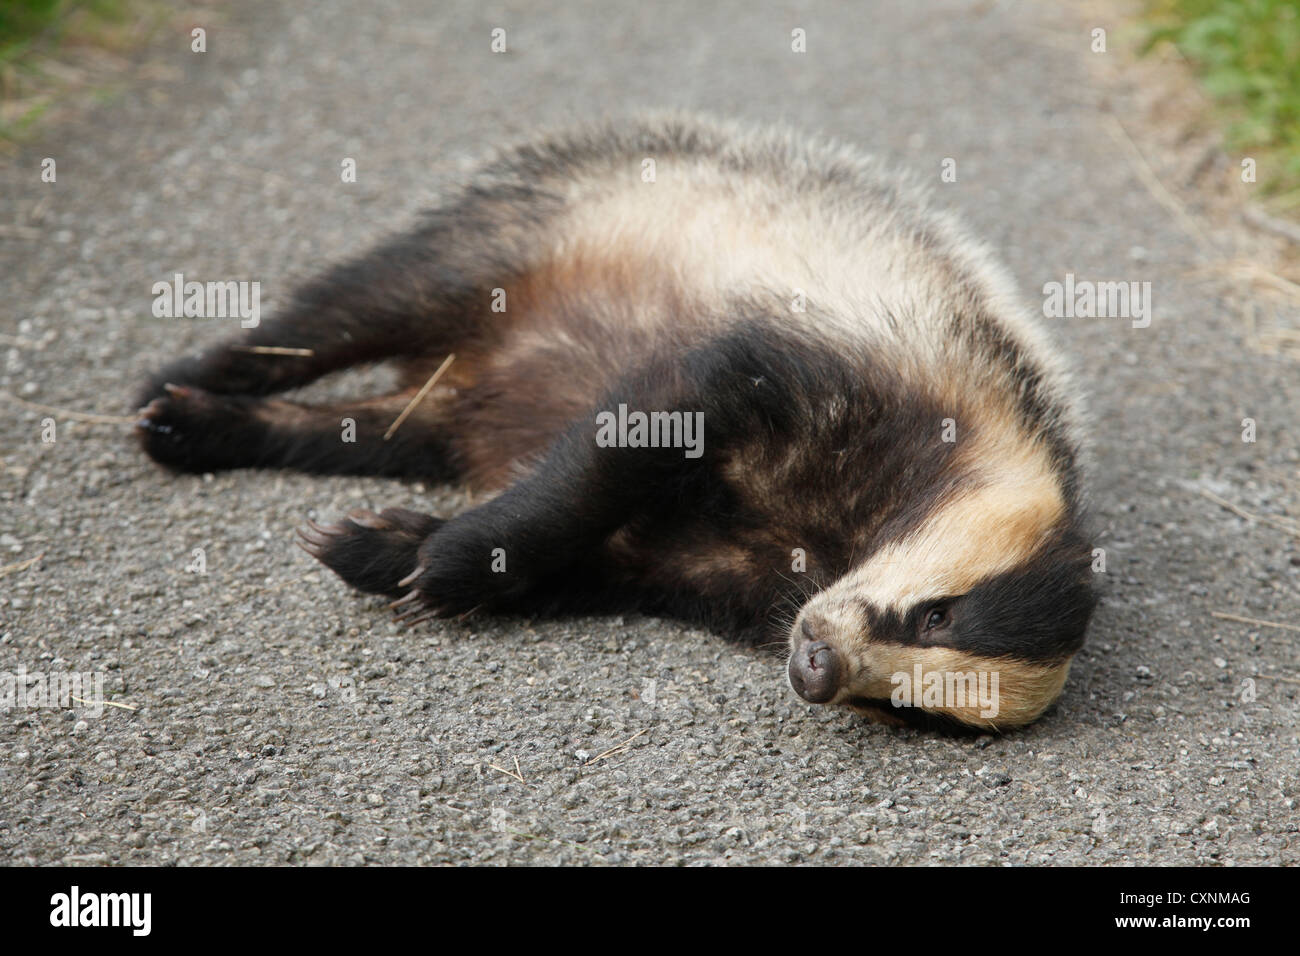 A dead badger on a rural lane in the U.K. Stock Photo